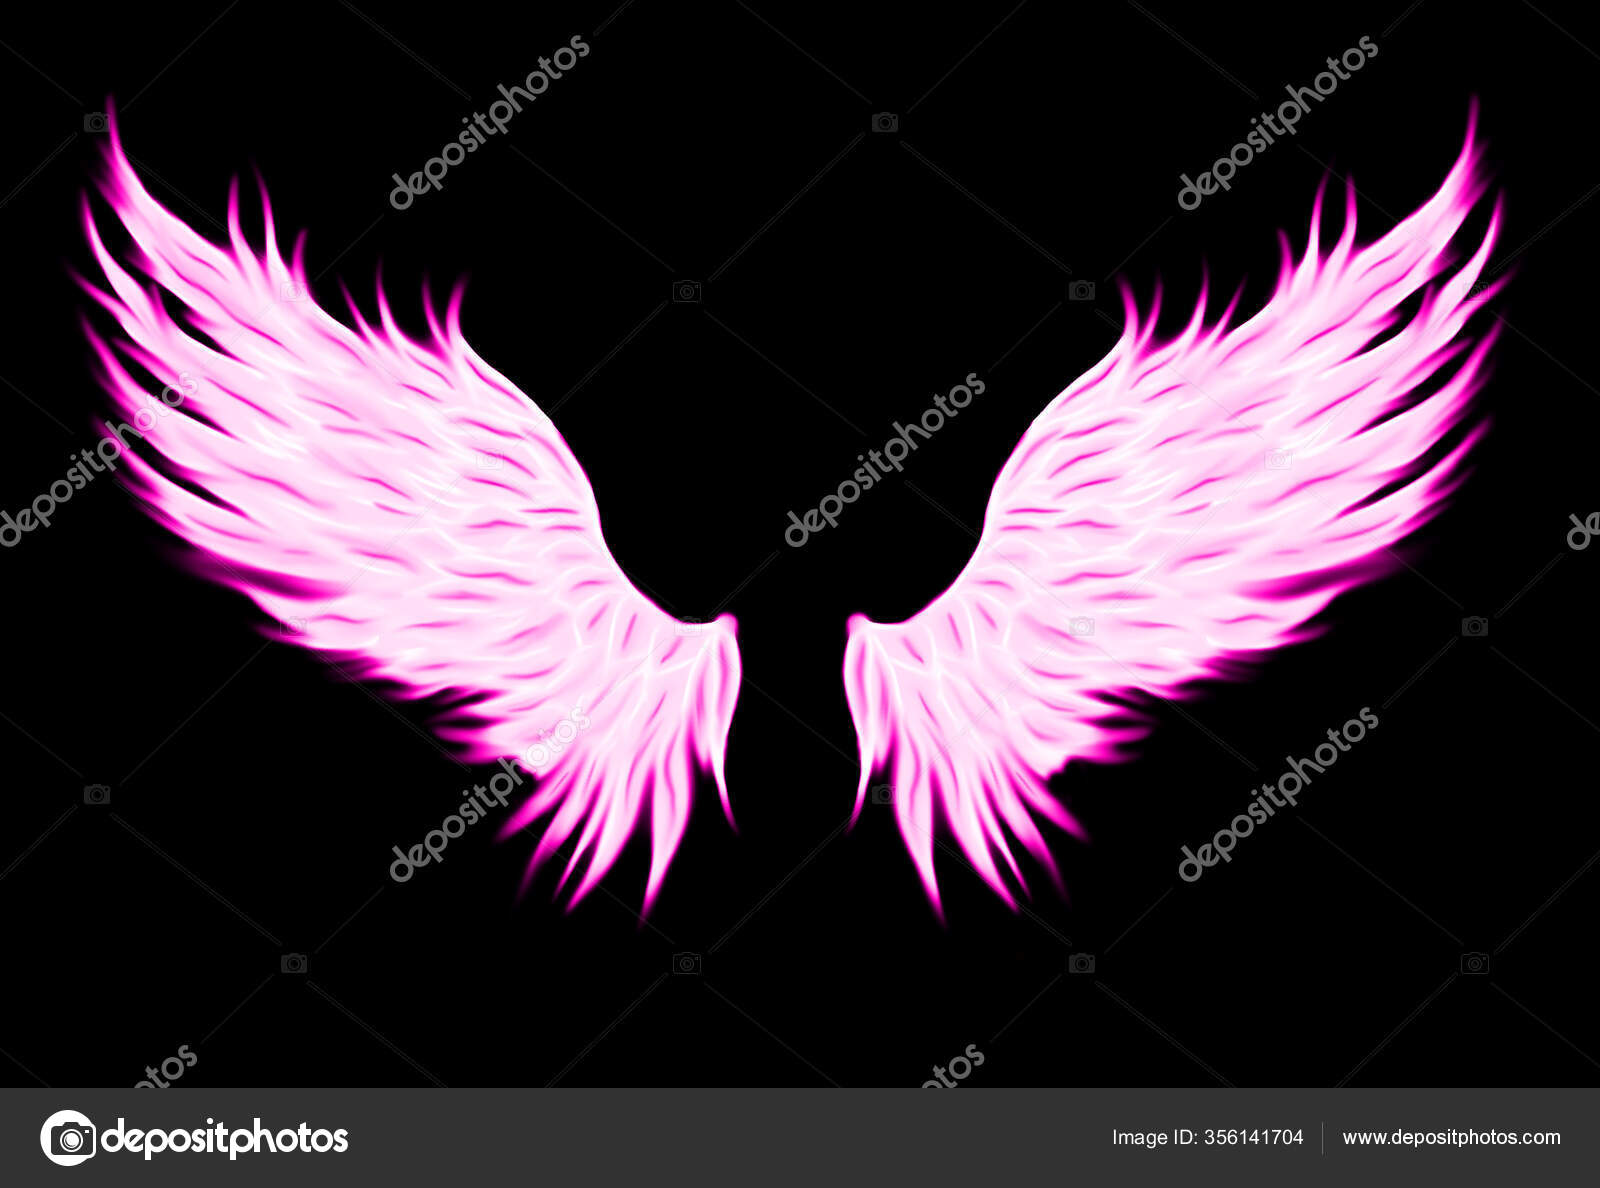 Pink Angel Wings Illustration Isolated Black Background Stock Photo by  ©weftandweave 356141704